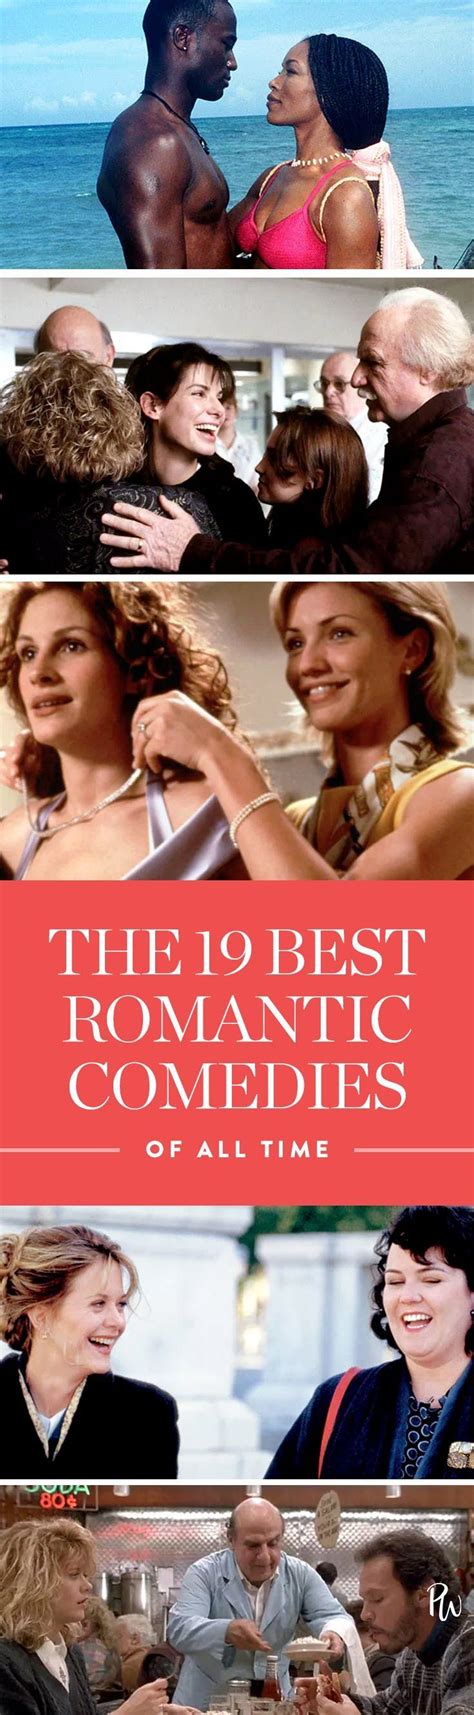 Read our list of the best comedy movies of all time, including the best comedies by decade and funniest films ever to hit the big screen. The 19 Best Romantic Comedies of All Time | Best romantic ...